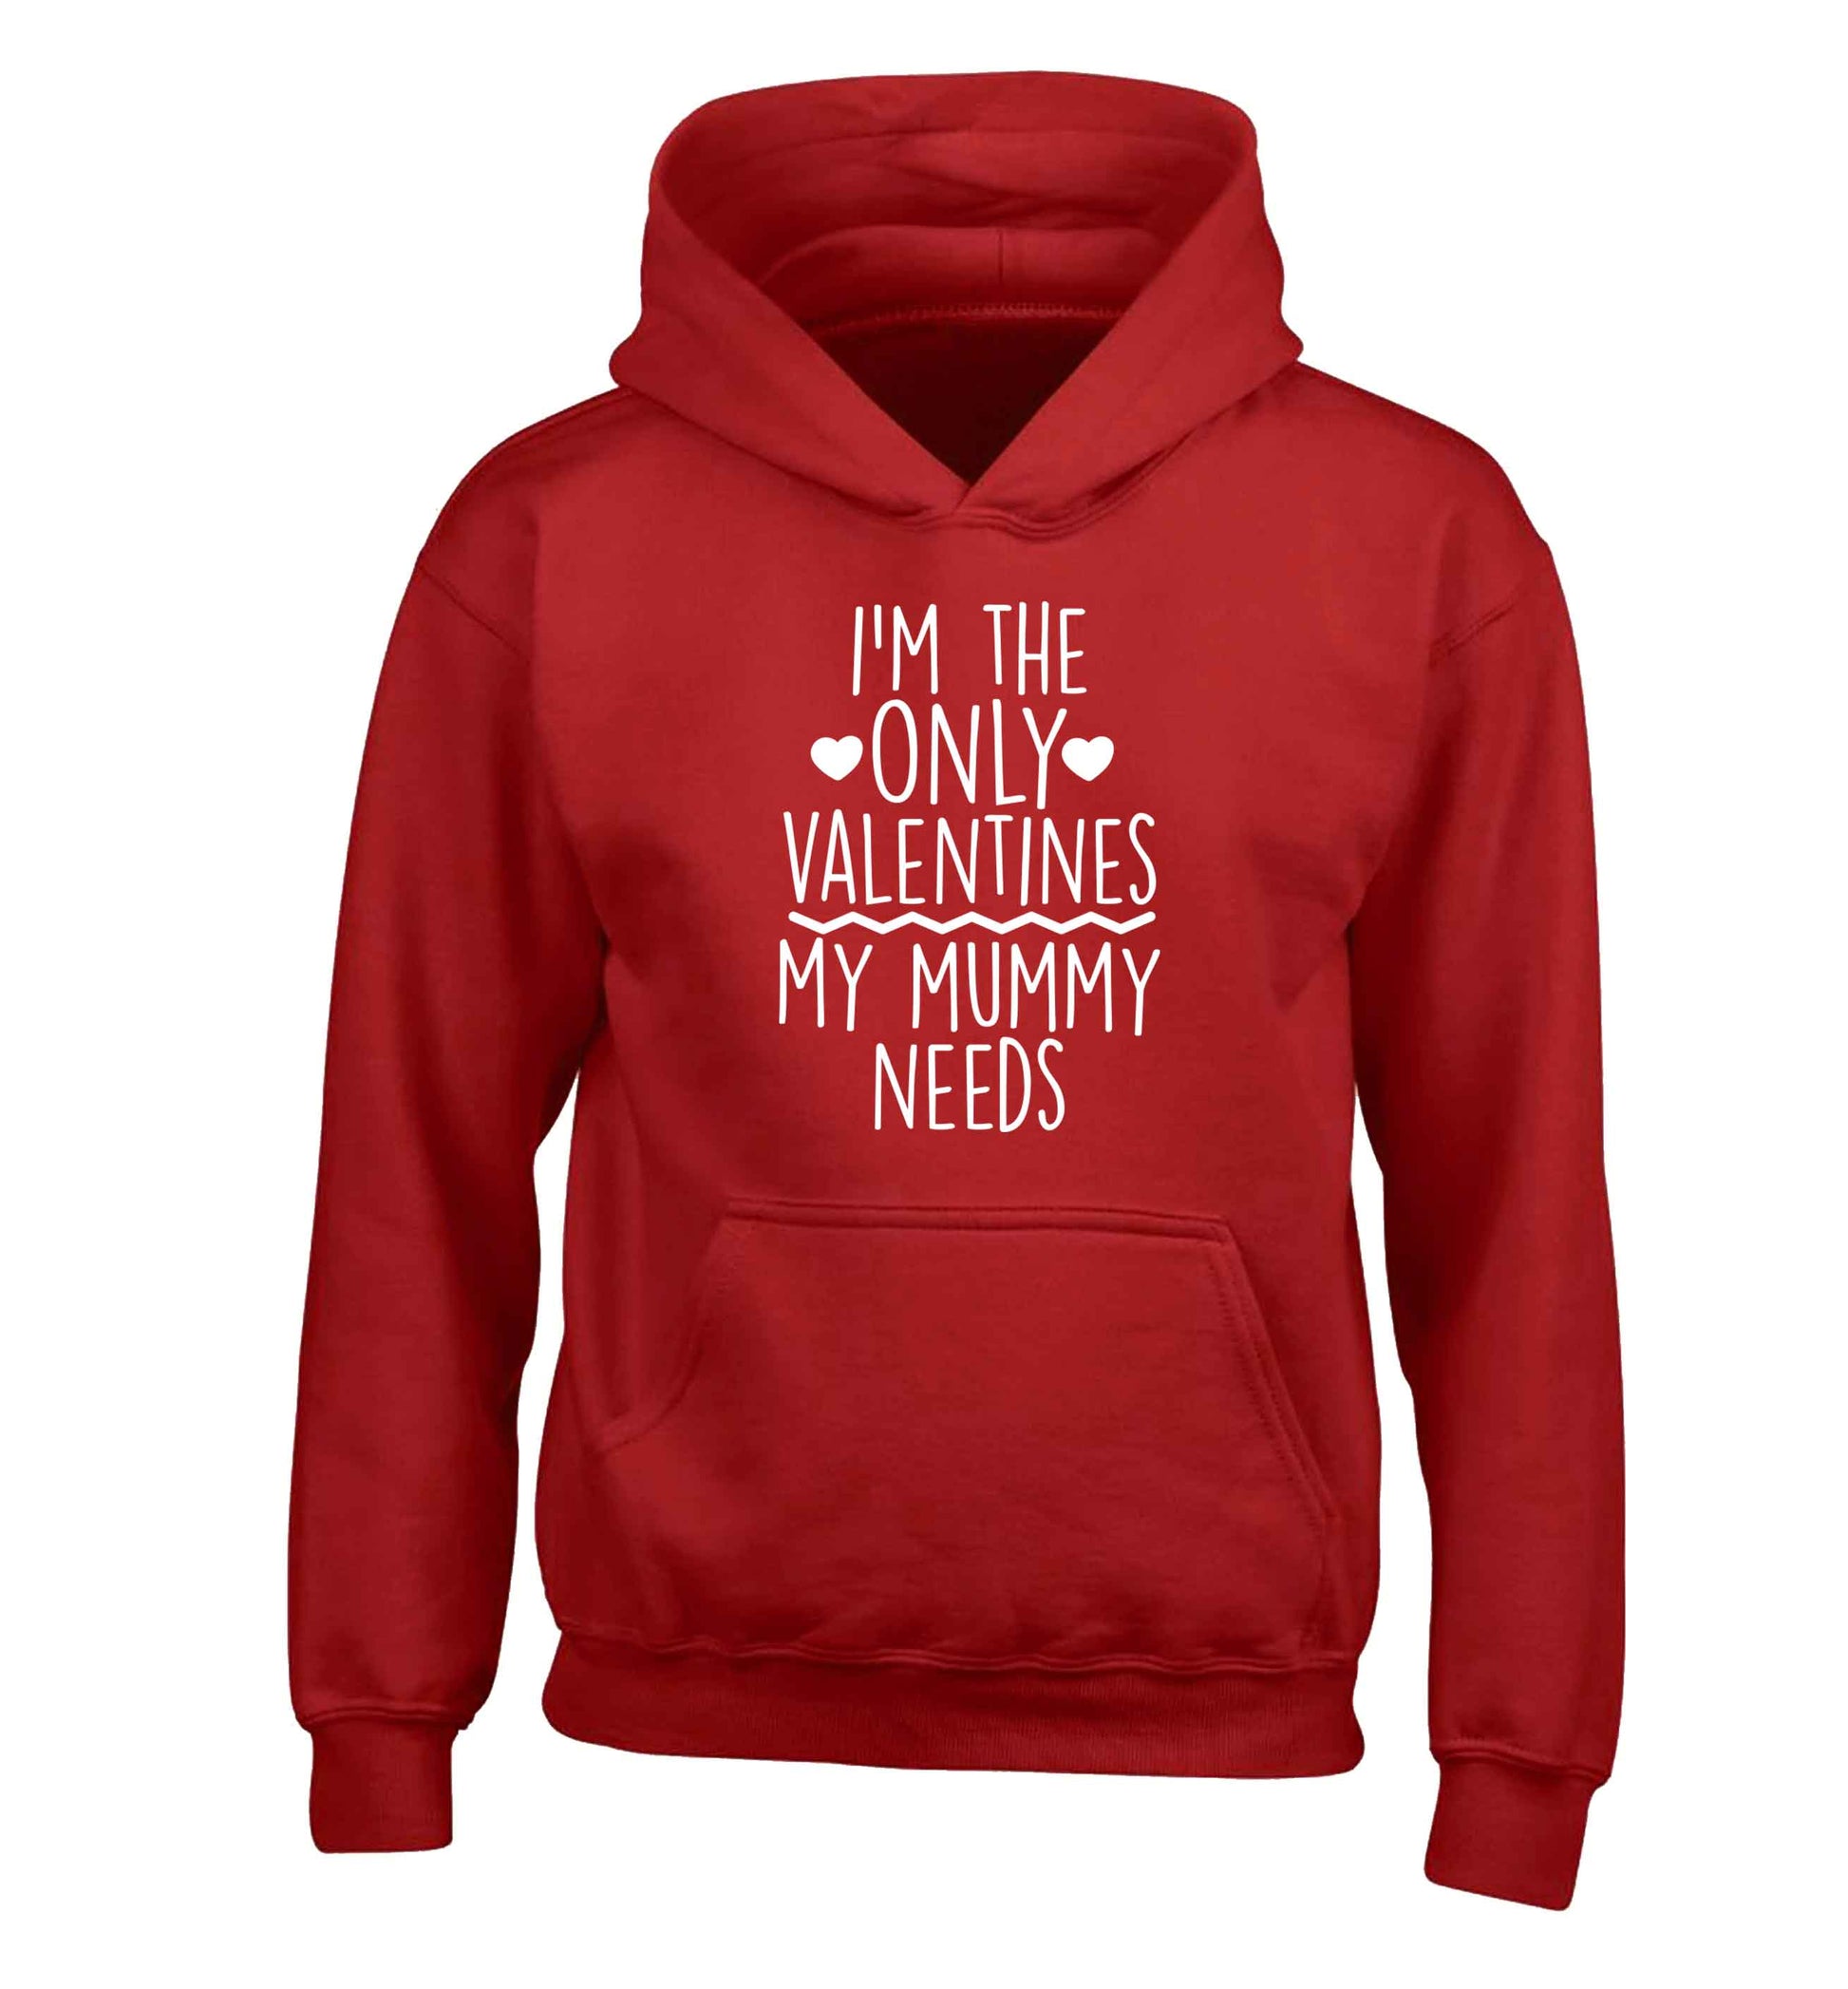 I'm the only valentines my mummy needs children's red hoodie 12-13 Years